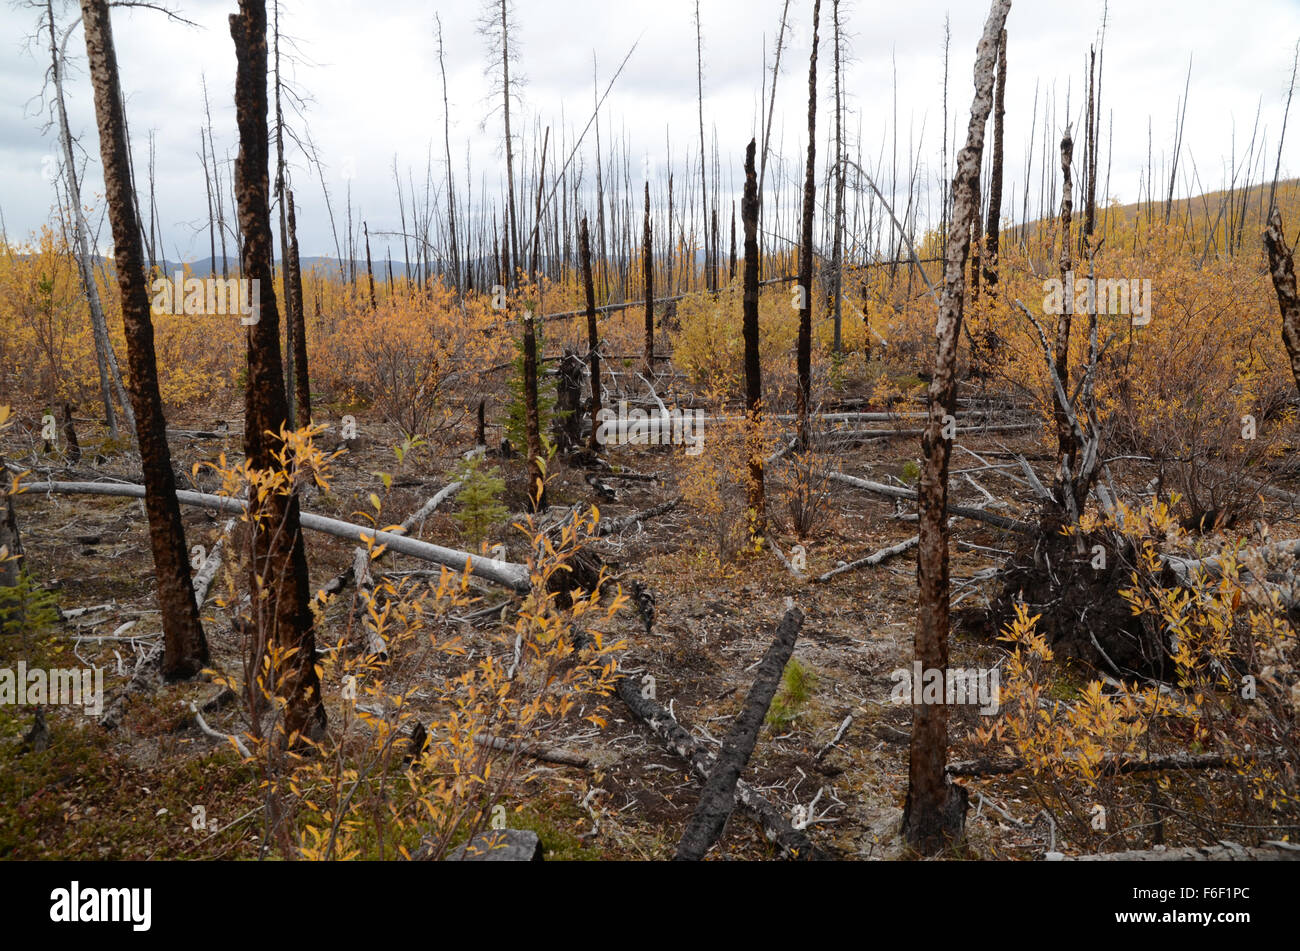 New growth appearing after a forest fire, Yukon, Canada Stock Photo